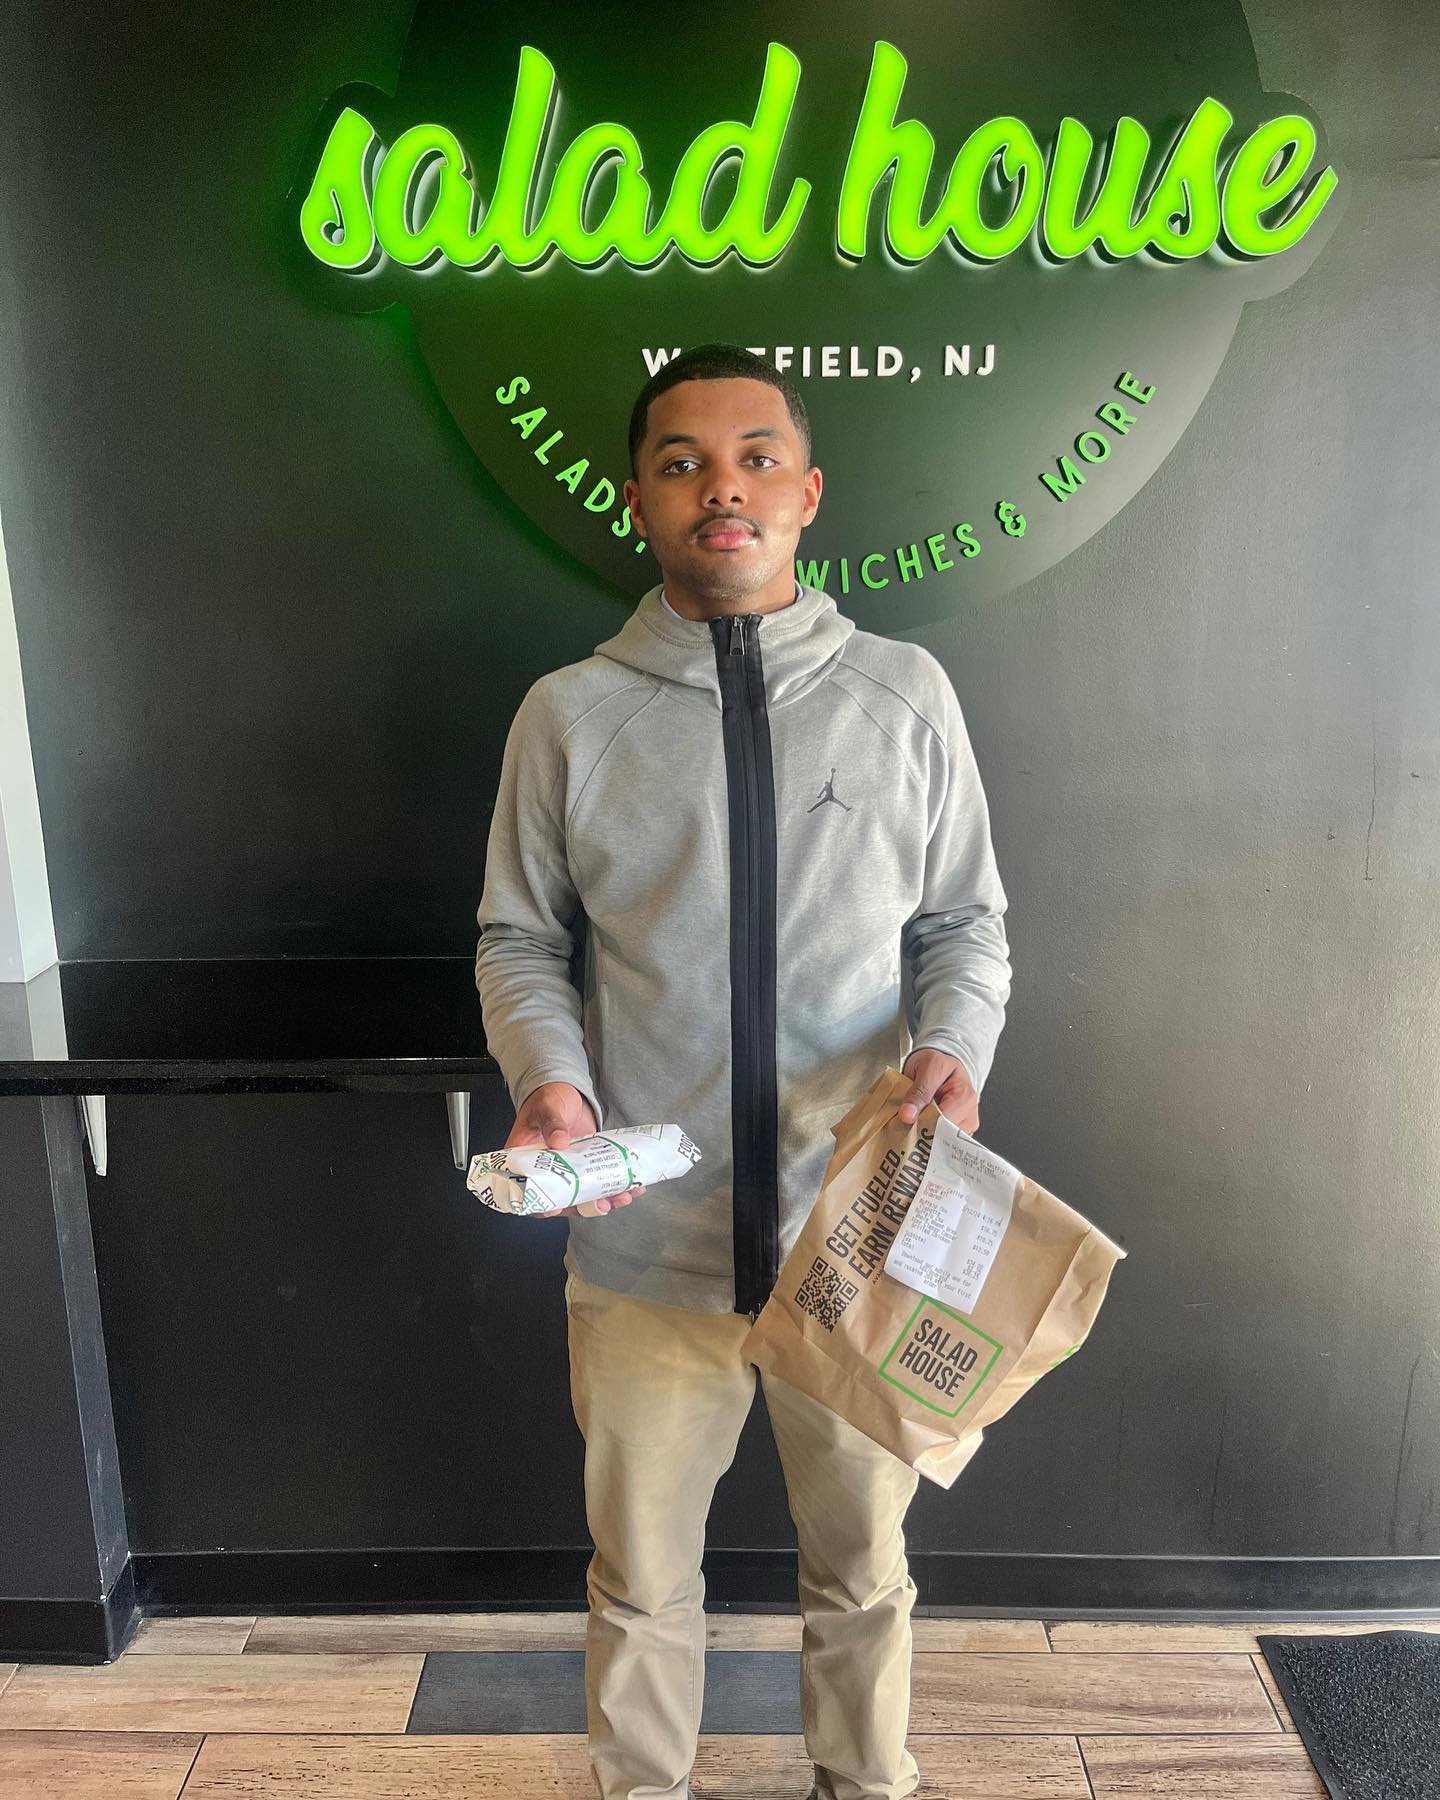 JG x Salad House
This is a go to spot for Jalen to get food that fuels him to preform his best on the court and in the classroom! 

@thesaladhouse is a franchise that we love, great food and even better people. A menu that has something for everyone 